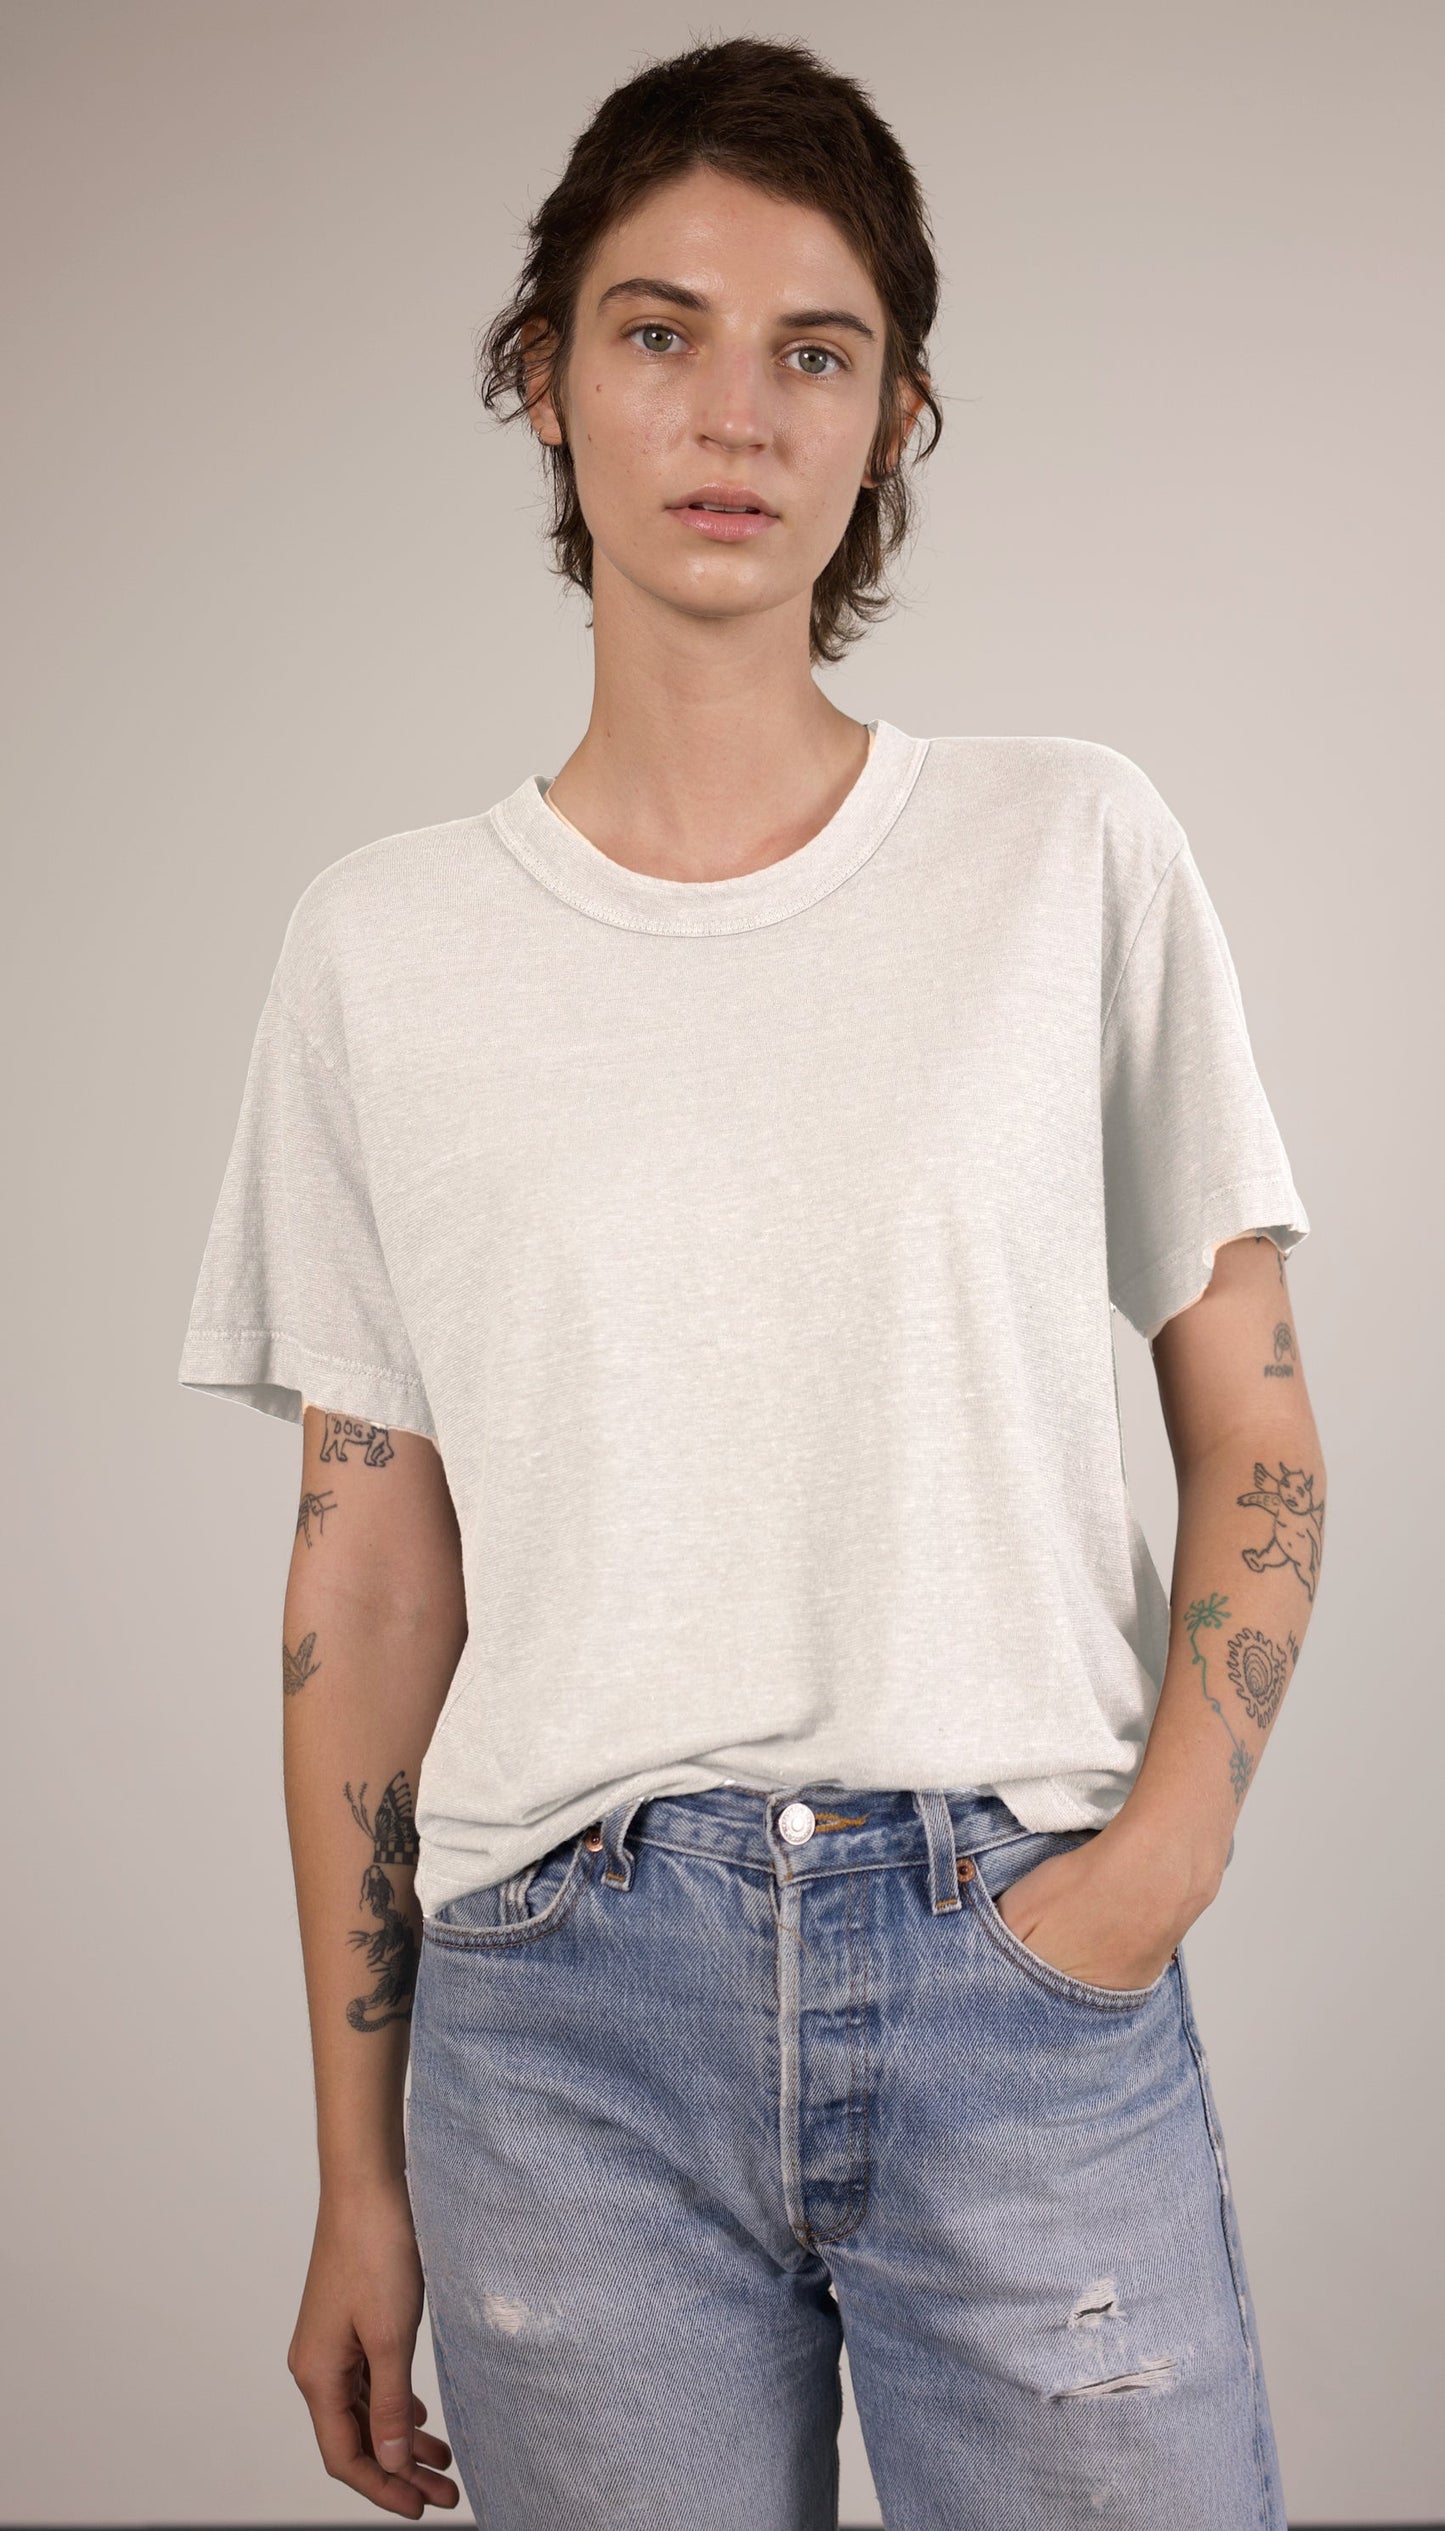 "The Mod Tee" - the perfect staple tee with a luxurious drape. Its loose, boxy fit and vintage bound neck add a cool factor. Striking the perfect balance between a relaxed, boxy silhouette and a flattering length complements any body shape.Made with 55% Hemp/ 45% Organic Cotton Jersey.